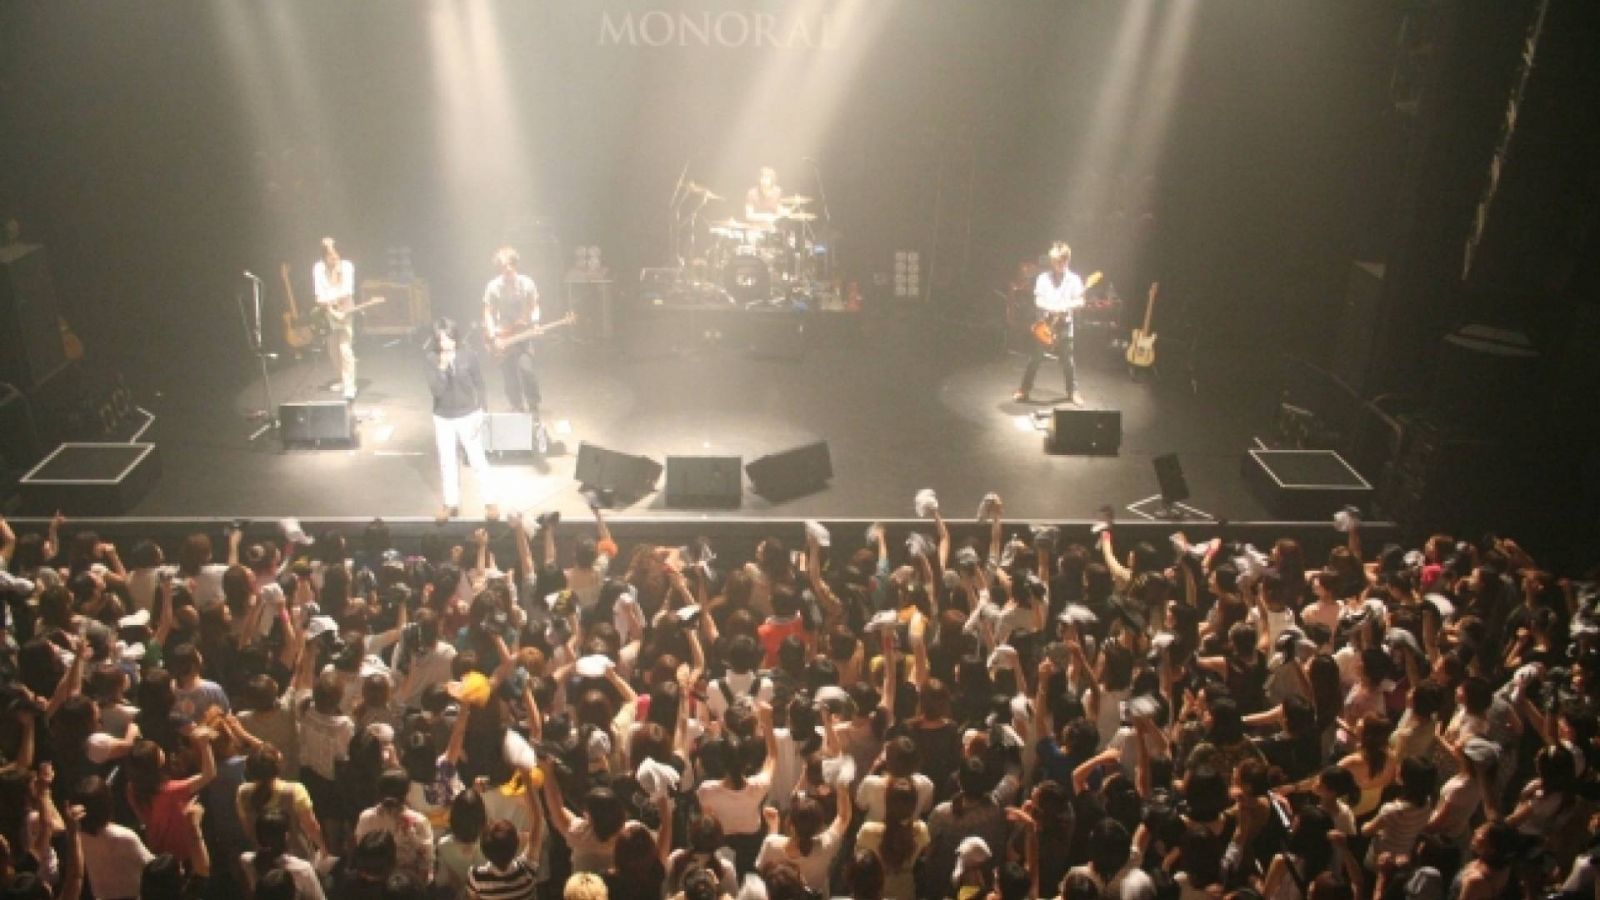 Live Report do MONORAL! © MONORAL - VAMPROSE